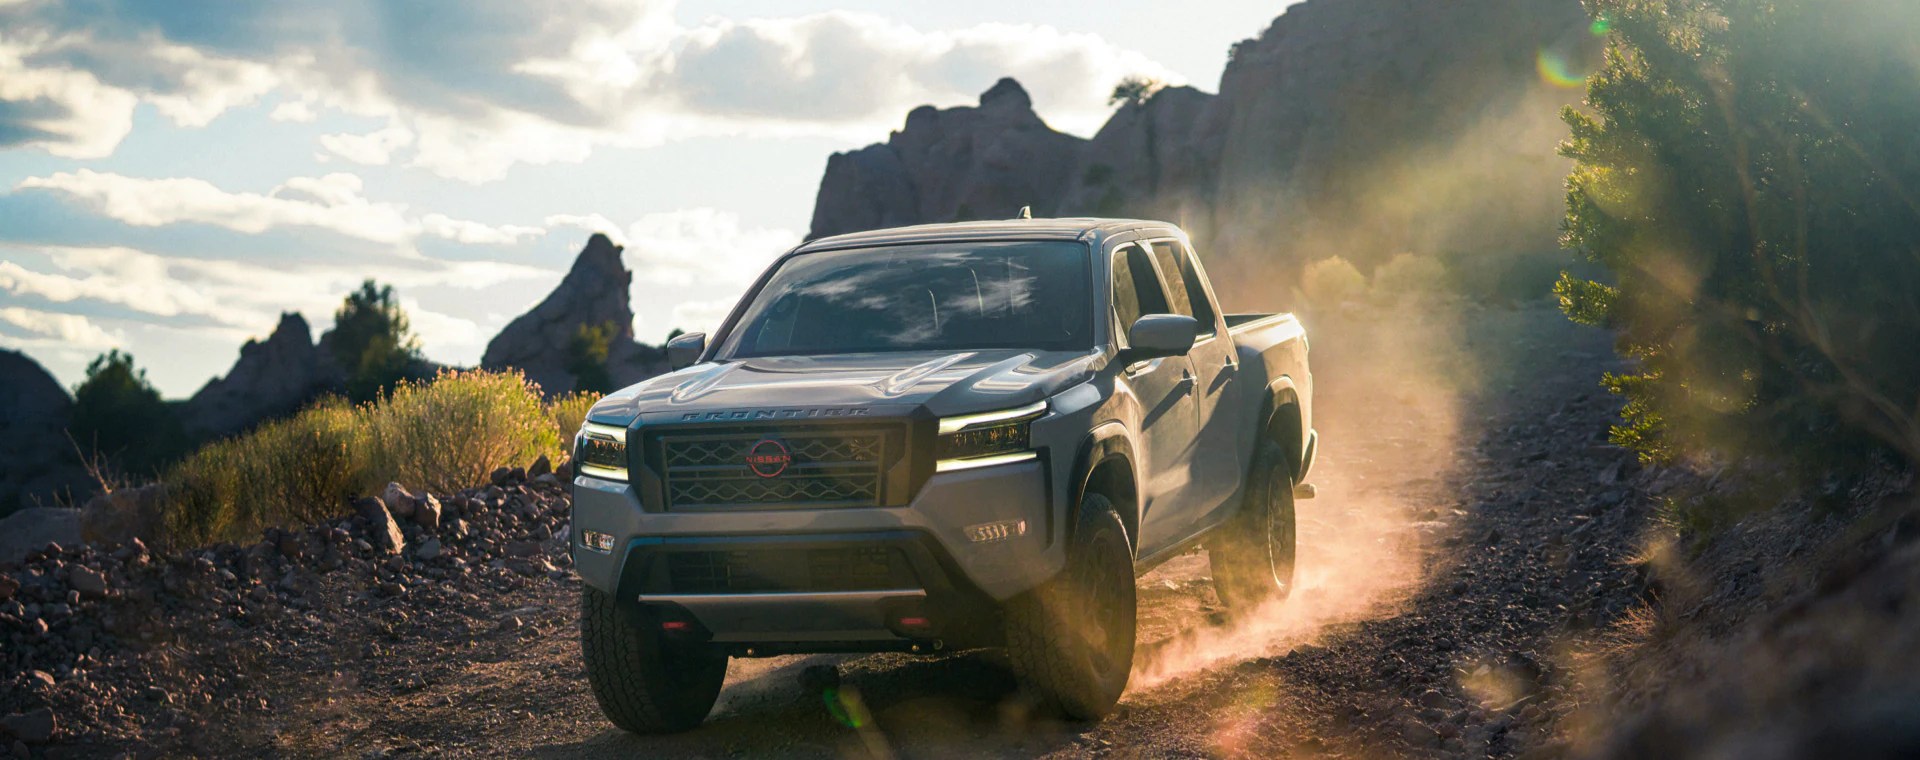 A 2022 Nissan Frontier shows off its off-road prowess as a mid-size truck